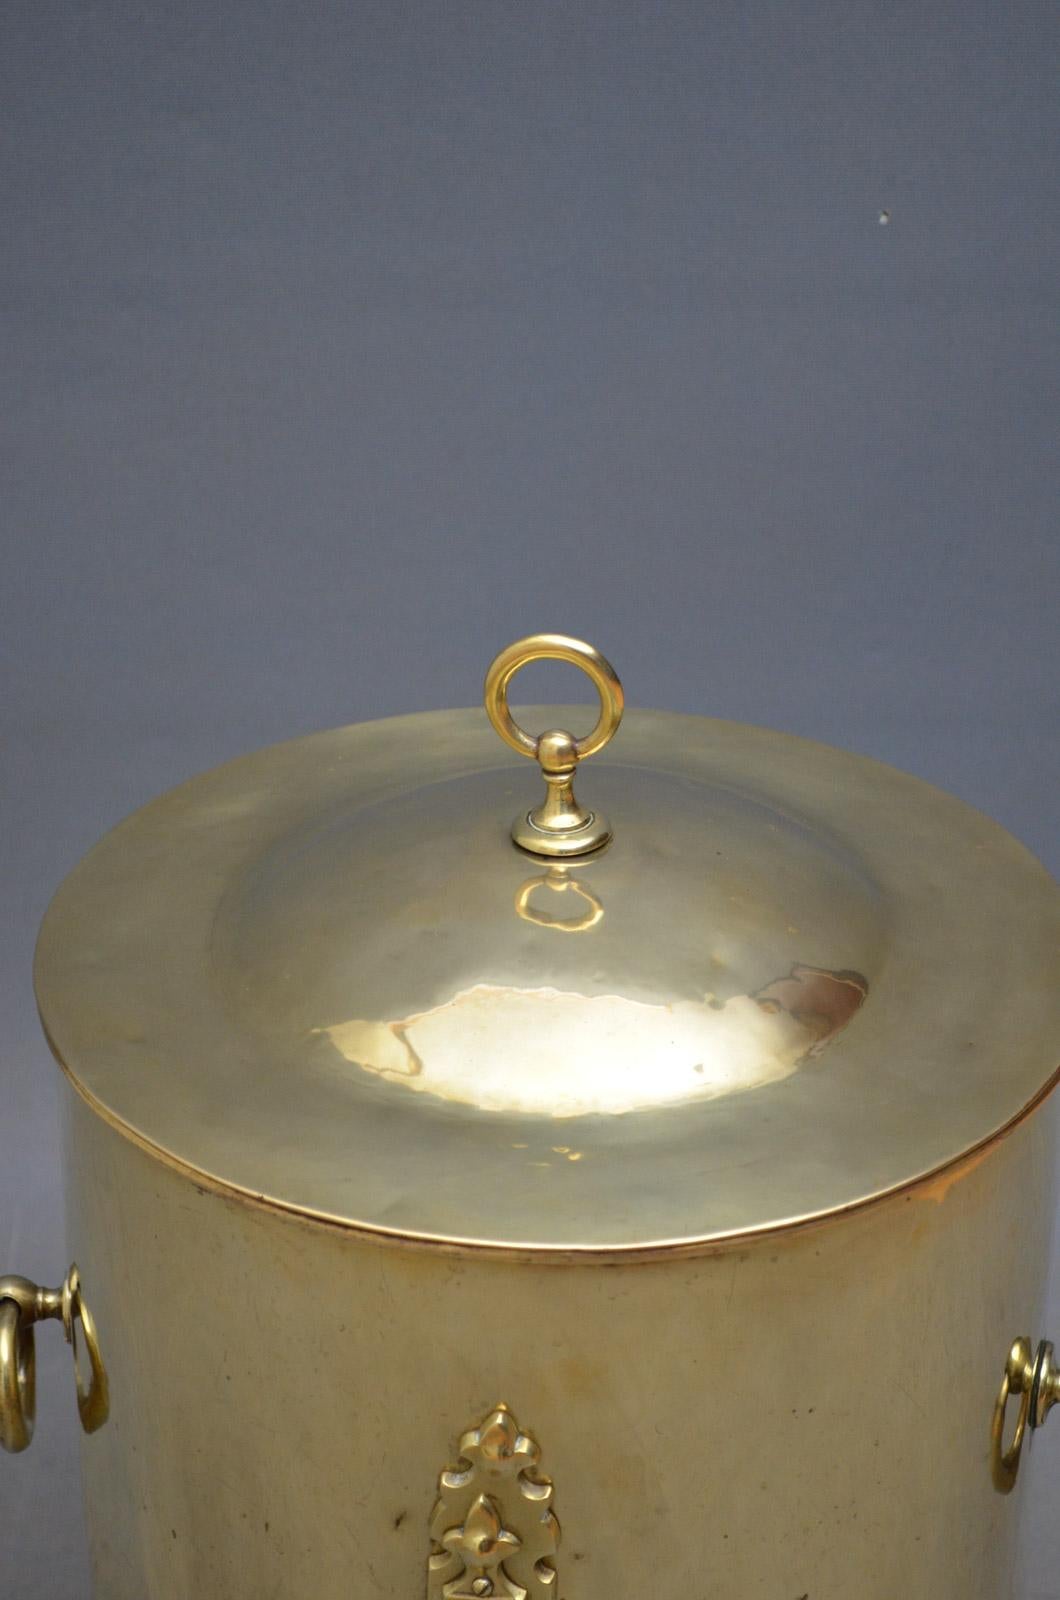 Sn4367  Edwardian brass coal bucket of circular design, with lift up lid, carrying handles and three feet, circa 1900

H 18